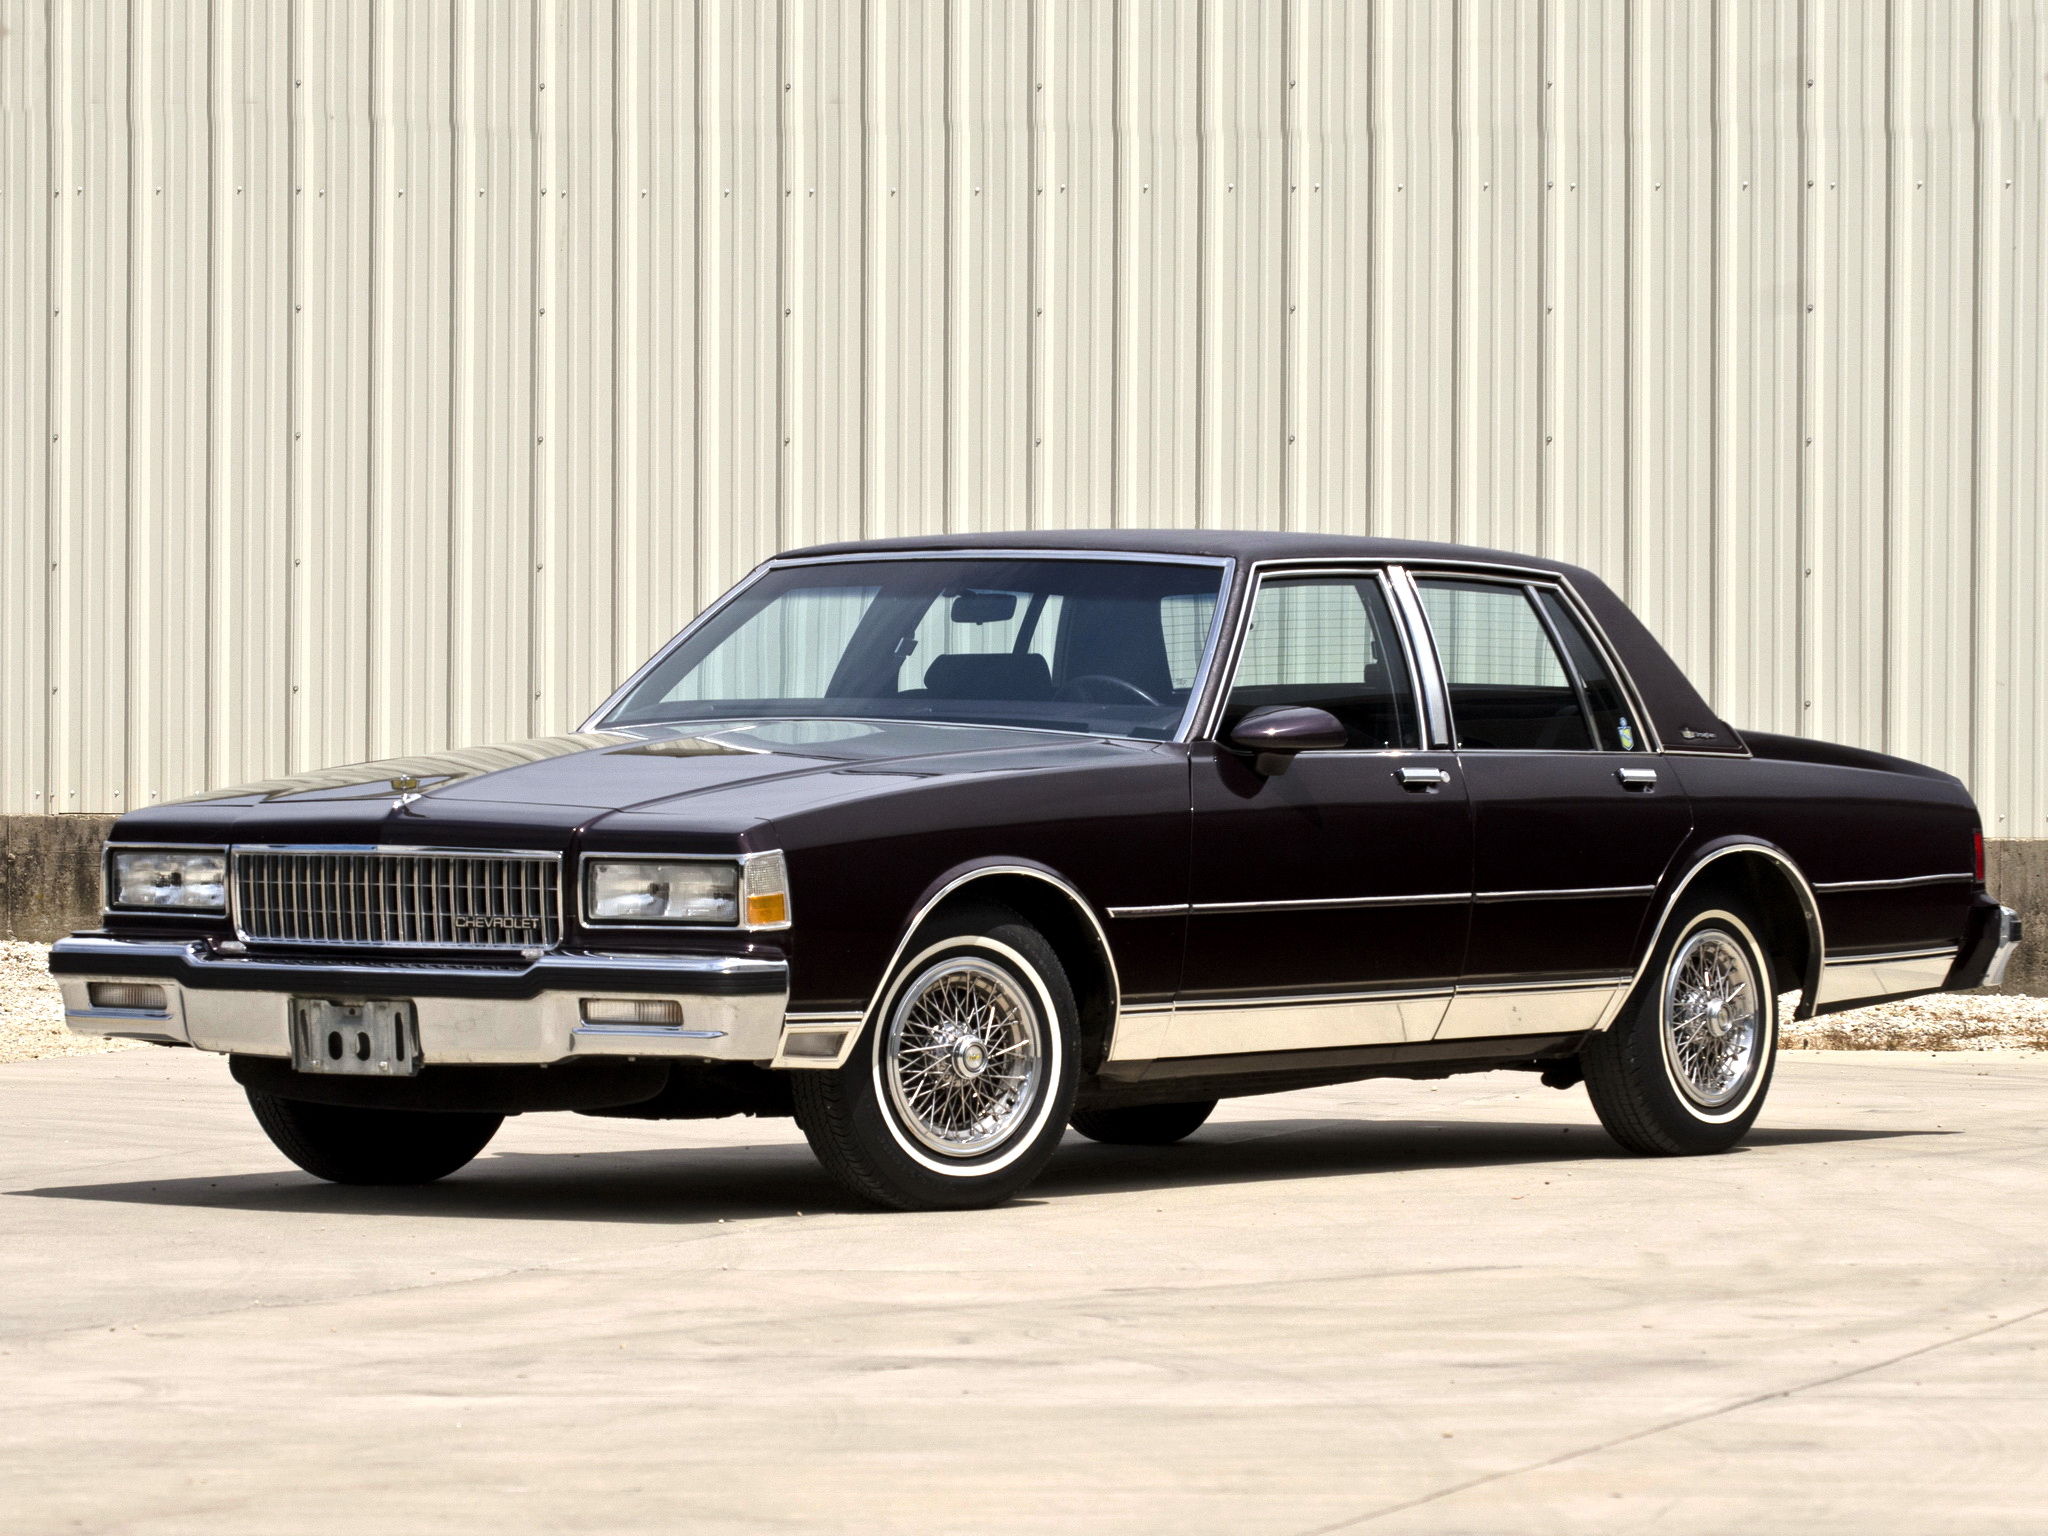 Chevrolet Wallpapers Chevrolet Caprice Classic Brougham 1987